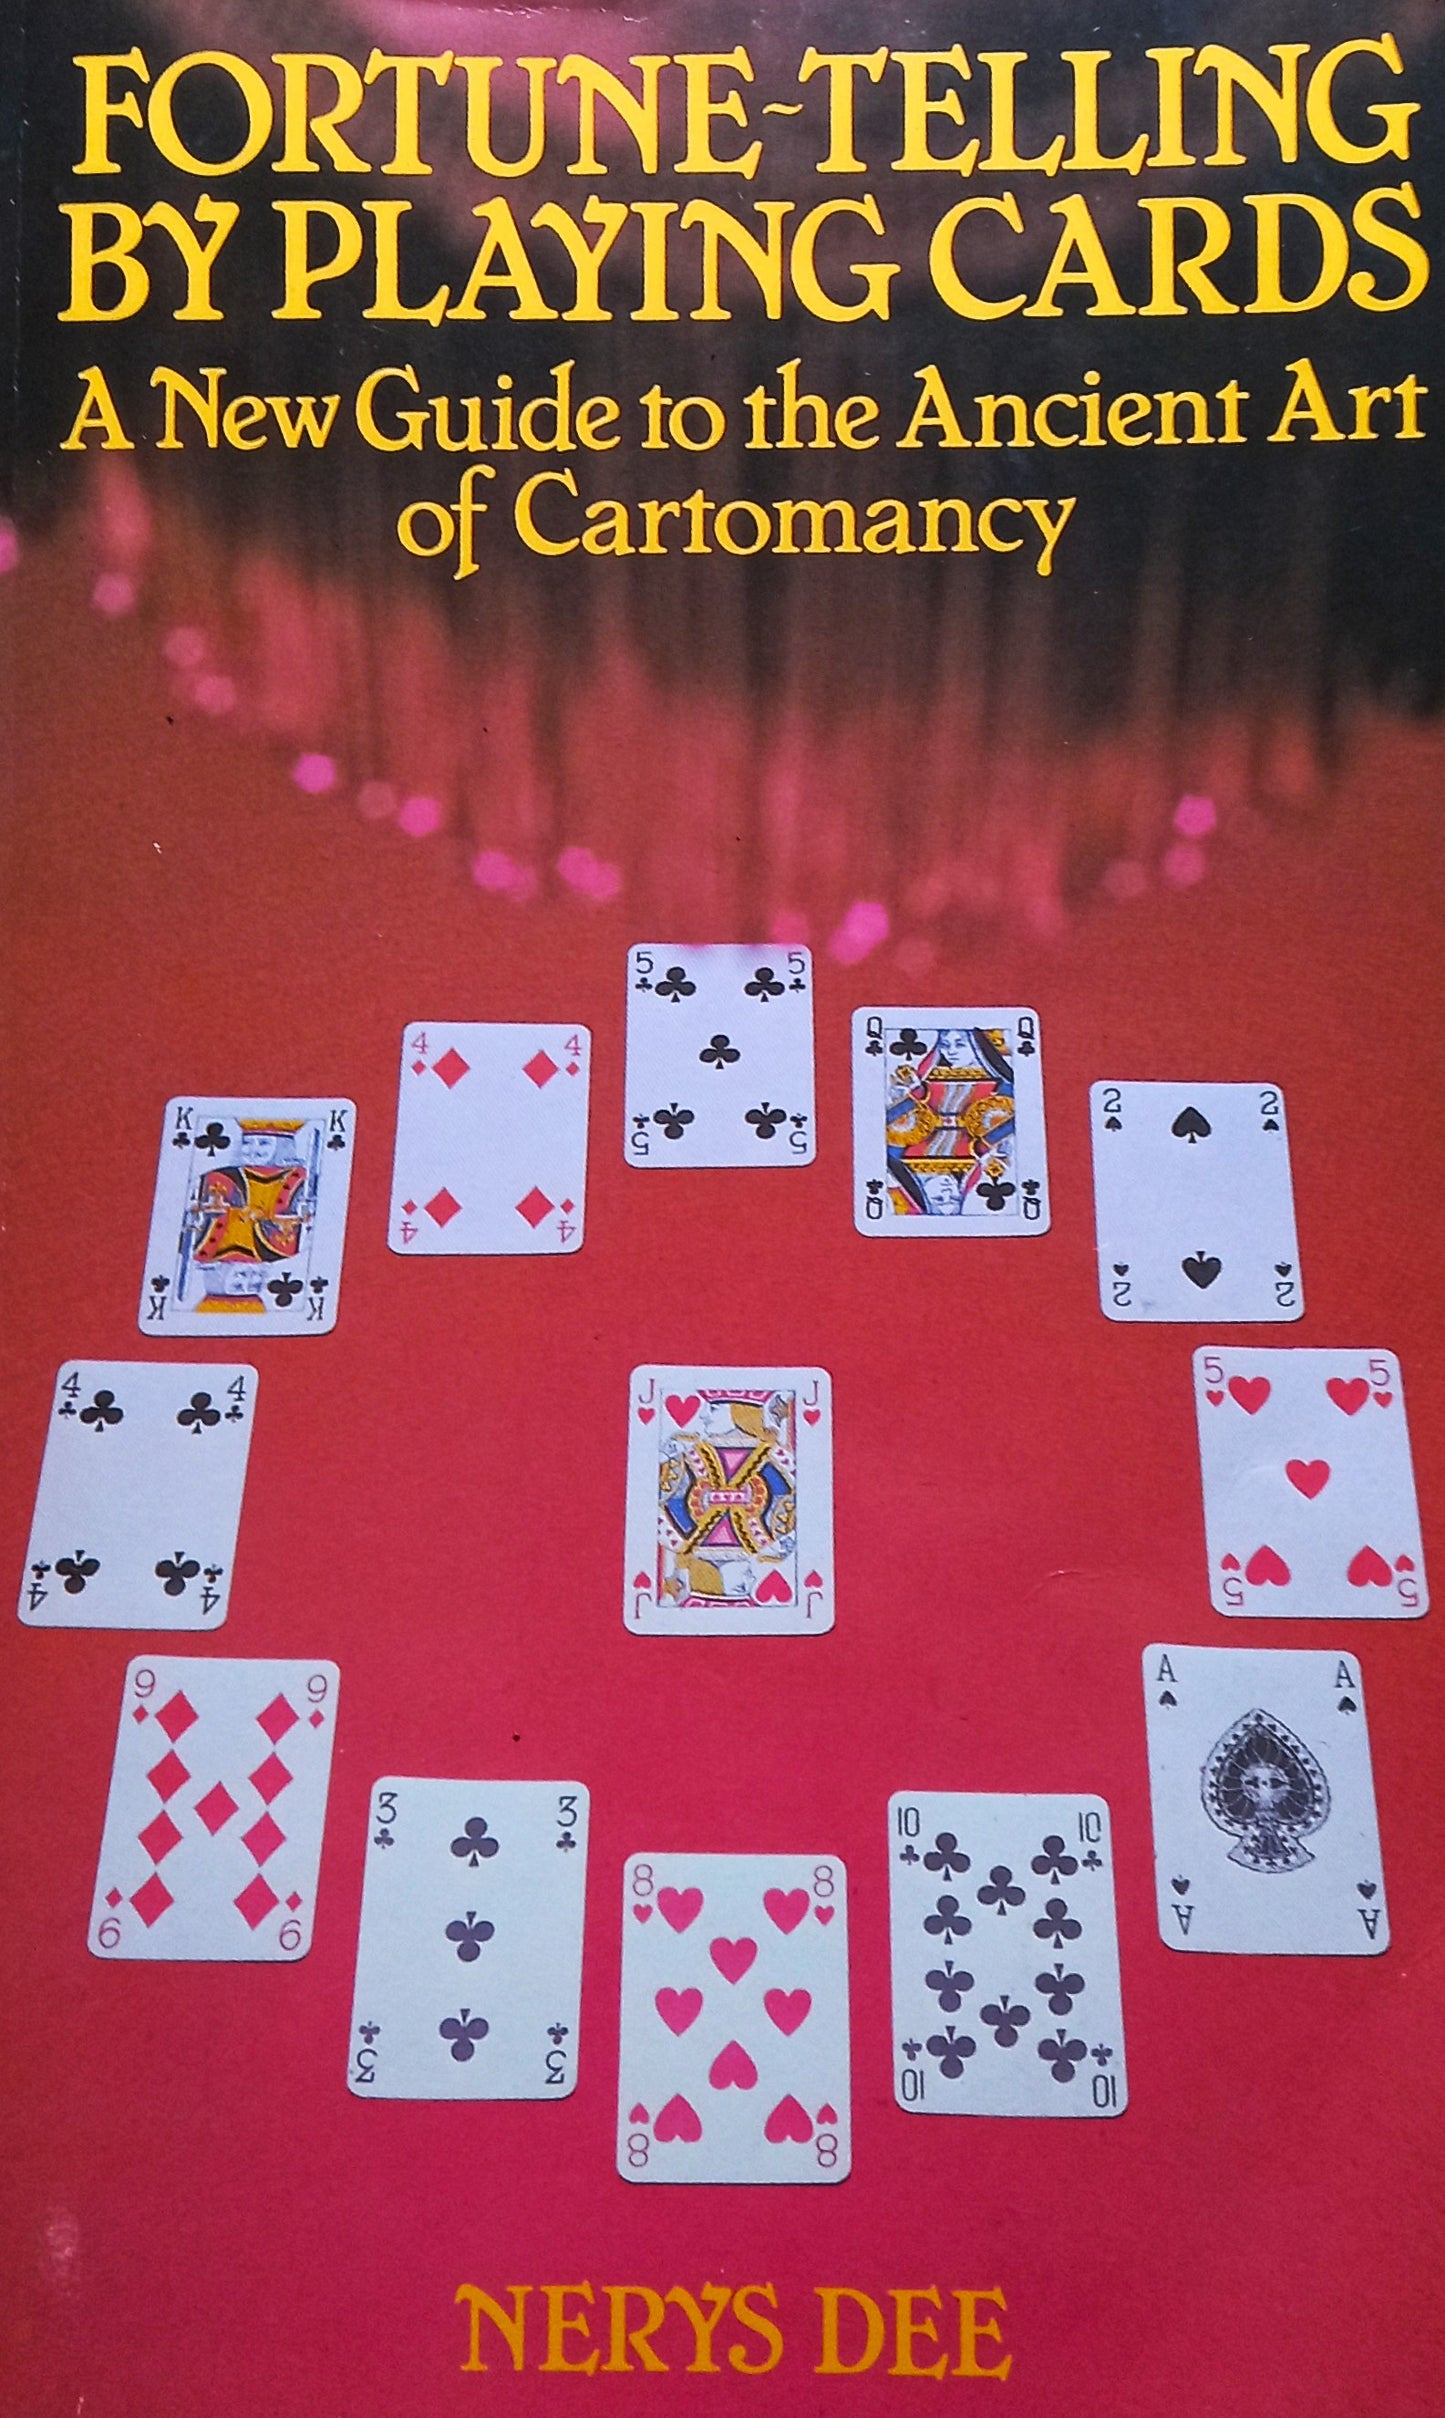 Fortune-Telling by Playing Cards: A New Guide To The Ancient Art Of Cartomancy